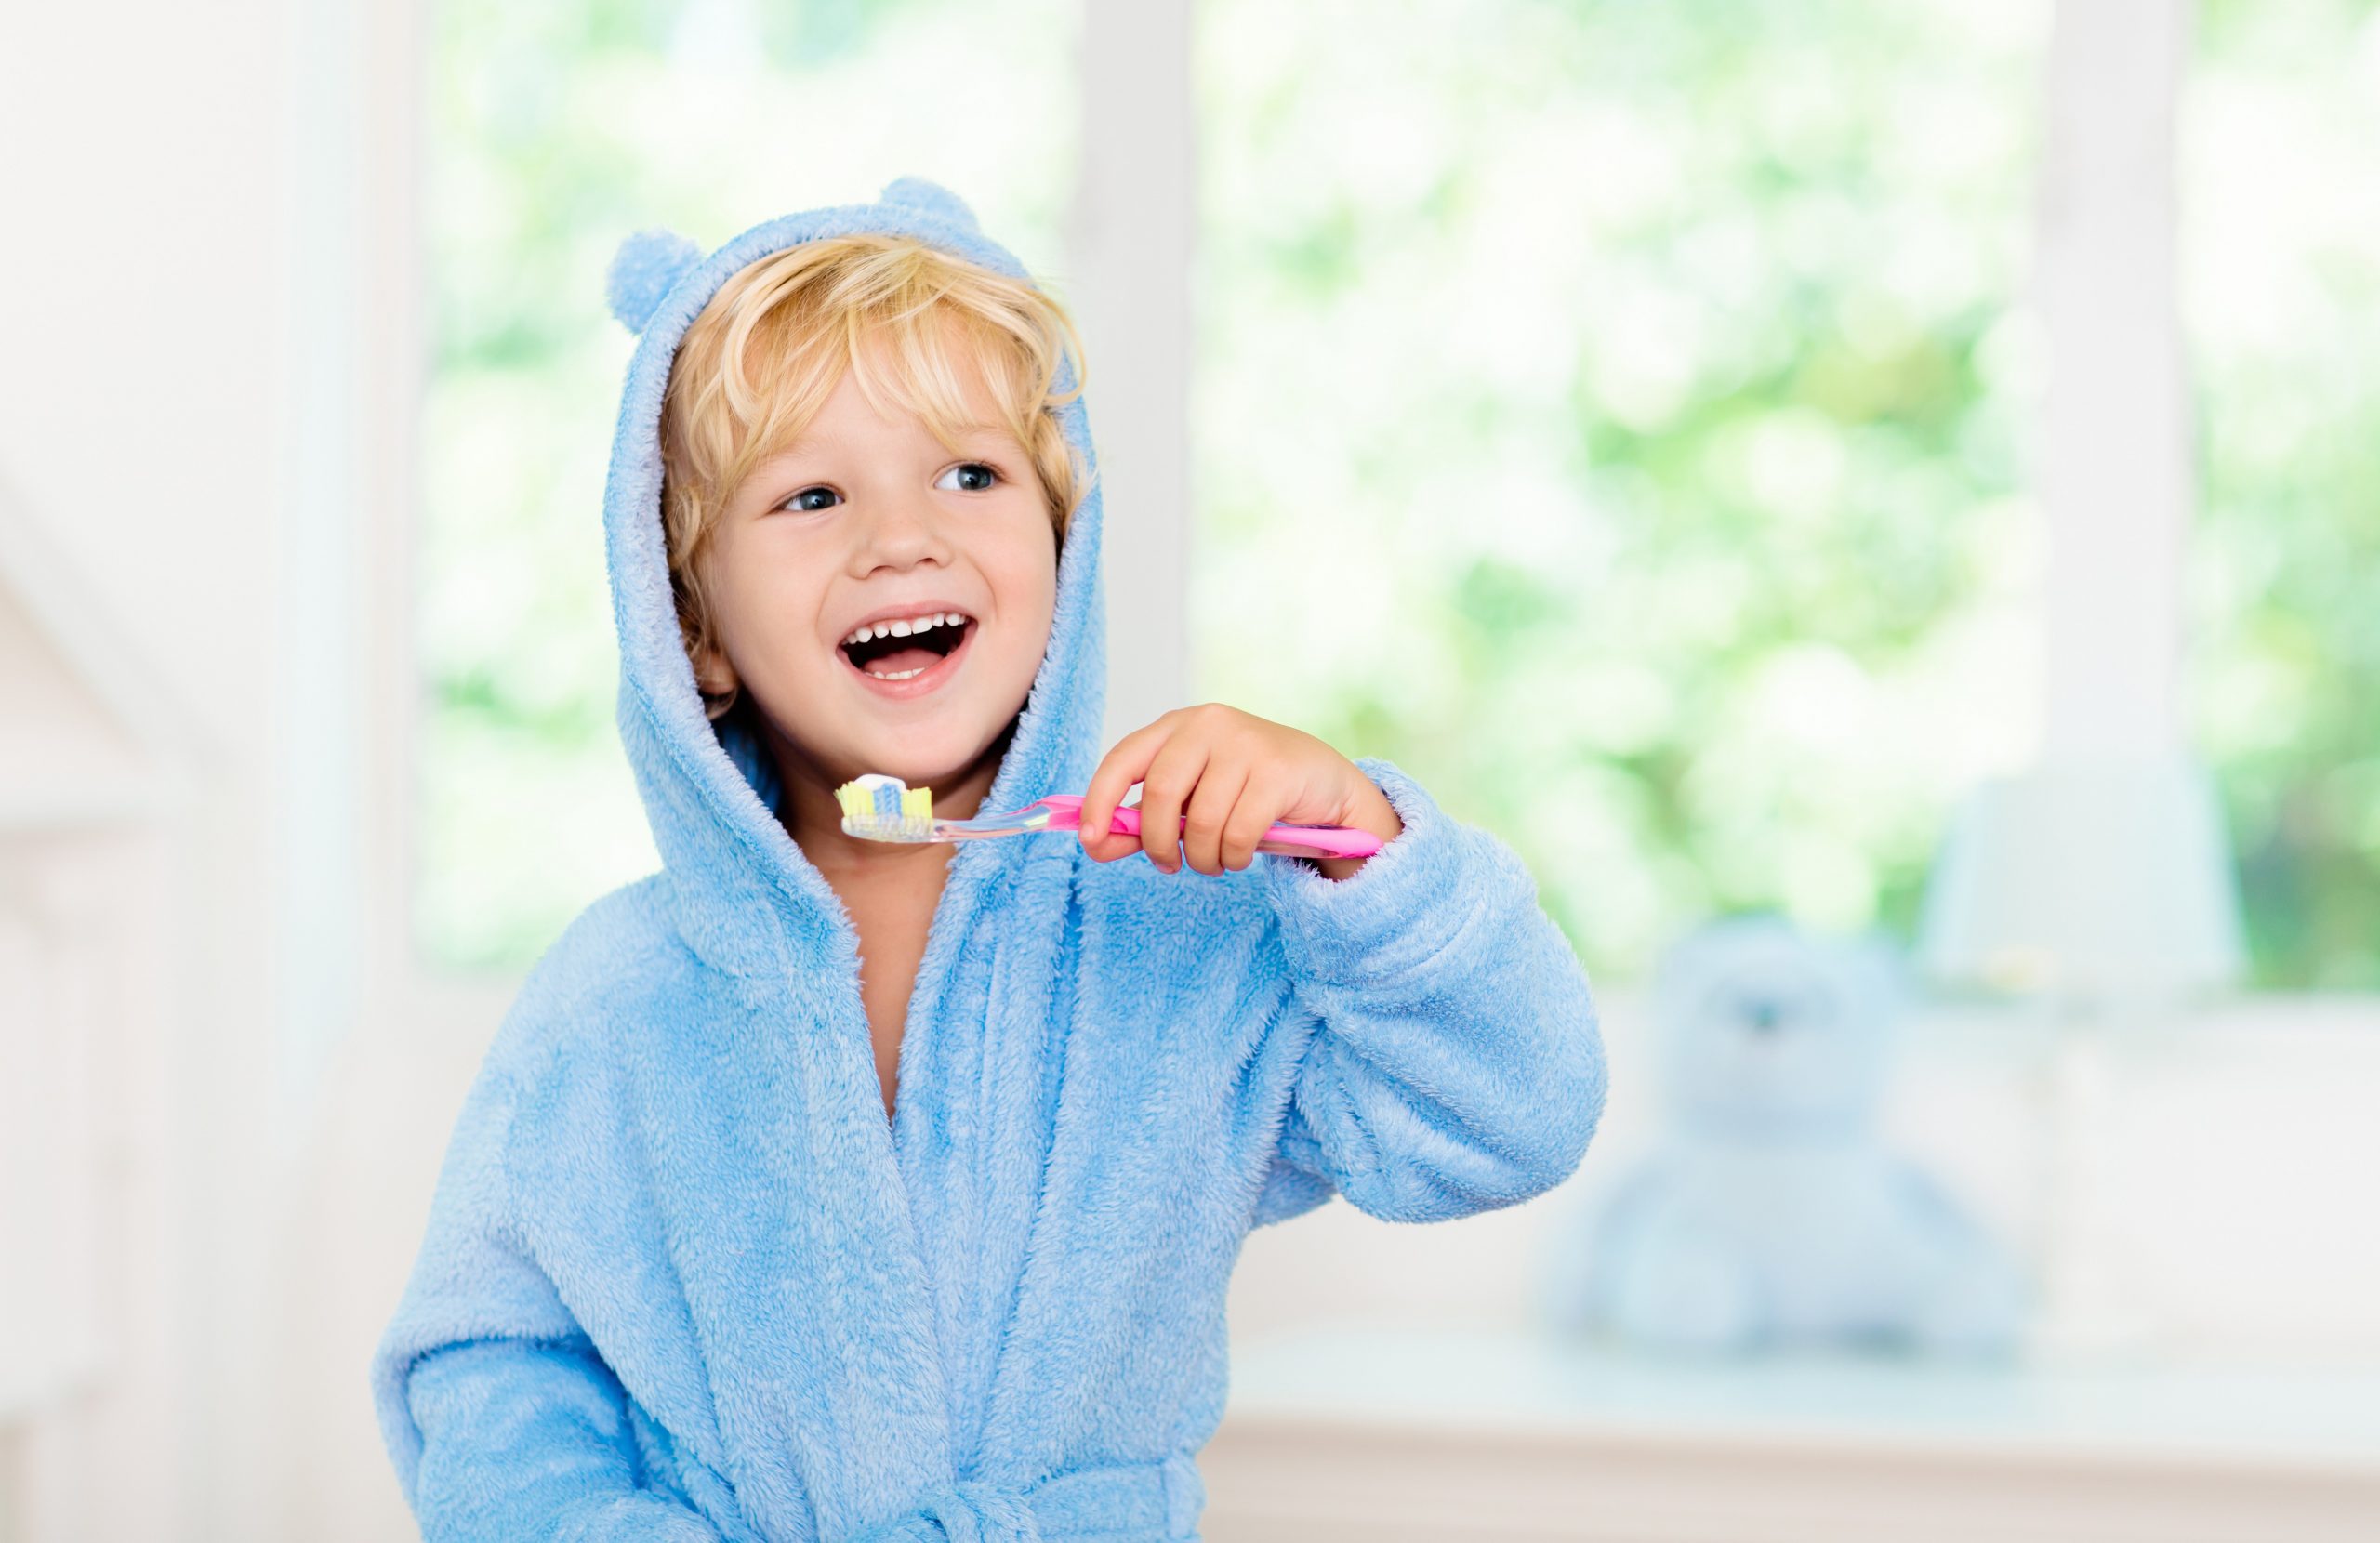 A happy young child holding a toothbrush